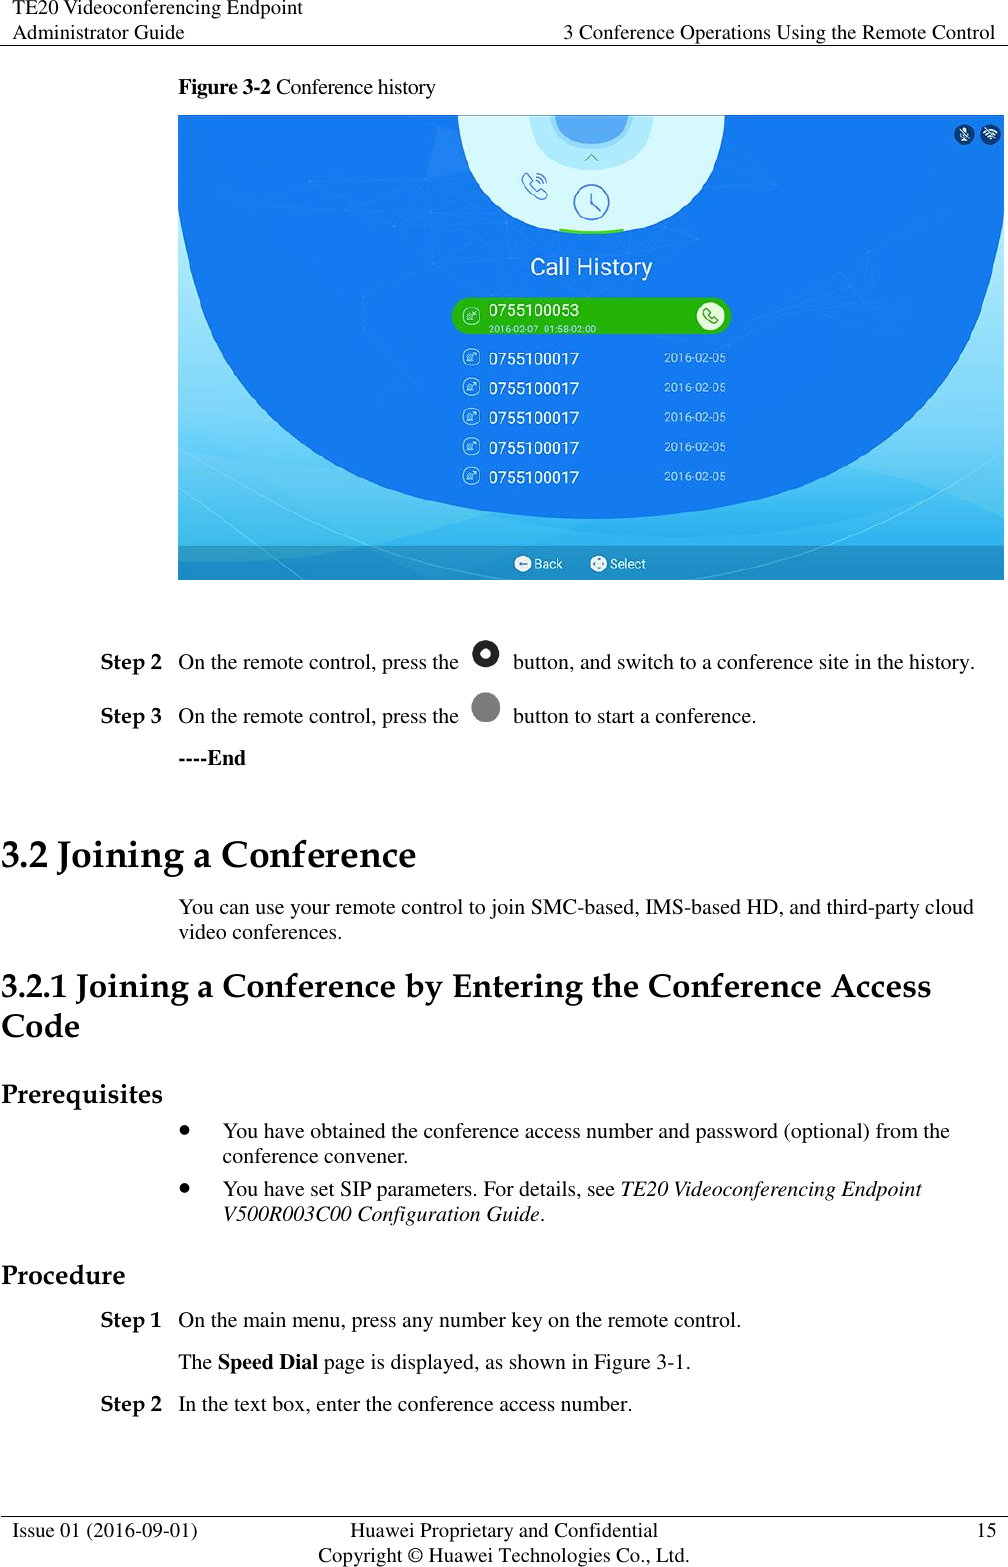 TE20 Videoconferencing Endpoint Administrator Guide 3 Conference Operations Using the Remote Control  Issue 01 (2016-09-01) Huawei Proprietary and Confidential                                     Copyright © Huawei Technologies Co., Ltd. 15  Figure 3-2 Conference history   Step 2 On the remote control, press the    button, and switch to a conference site in the history. Step 3 On the remote control, press the    button to start a conference. ----End 3.2 Joining a Conference You can use your remote control to join SMC-based, IMS-based HD, and third-party cloud video conferences. 3.2.1 Joining a Conference by Entering the Conference Access Code Prerequisites  You have obtained the conference access number and password (optional) from the conference convener.  You have set SIP parameters. For details, see TE20 Videoconferencing Endpoint V500R003C00 Configuration Guide. Procedure Step 1 On the main menu, press any number key on the remote control. The Speed Dial page is displayed, as shown in Figure 3-1. Step 2 In the text box, enter the conference access number. 